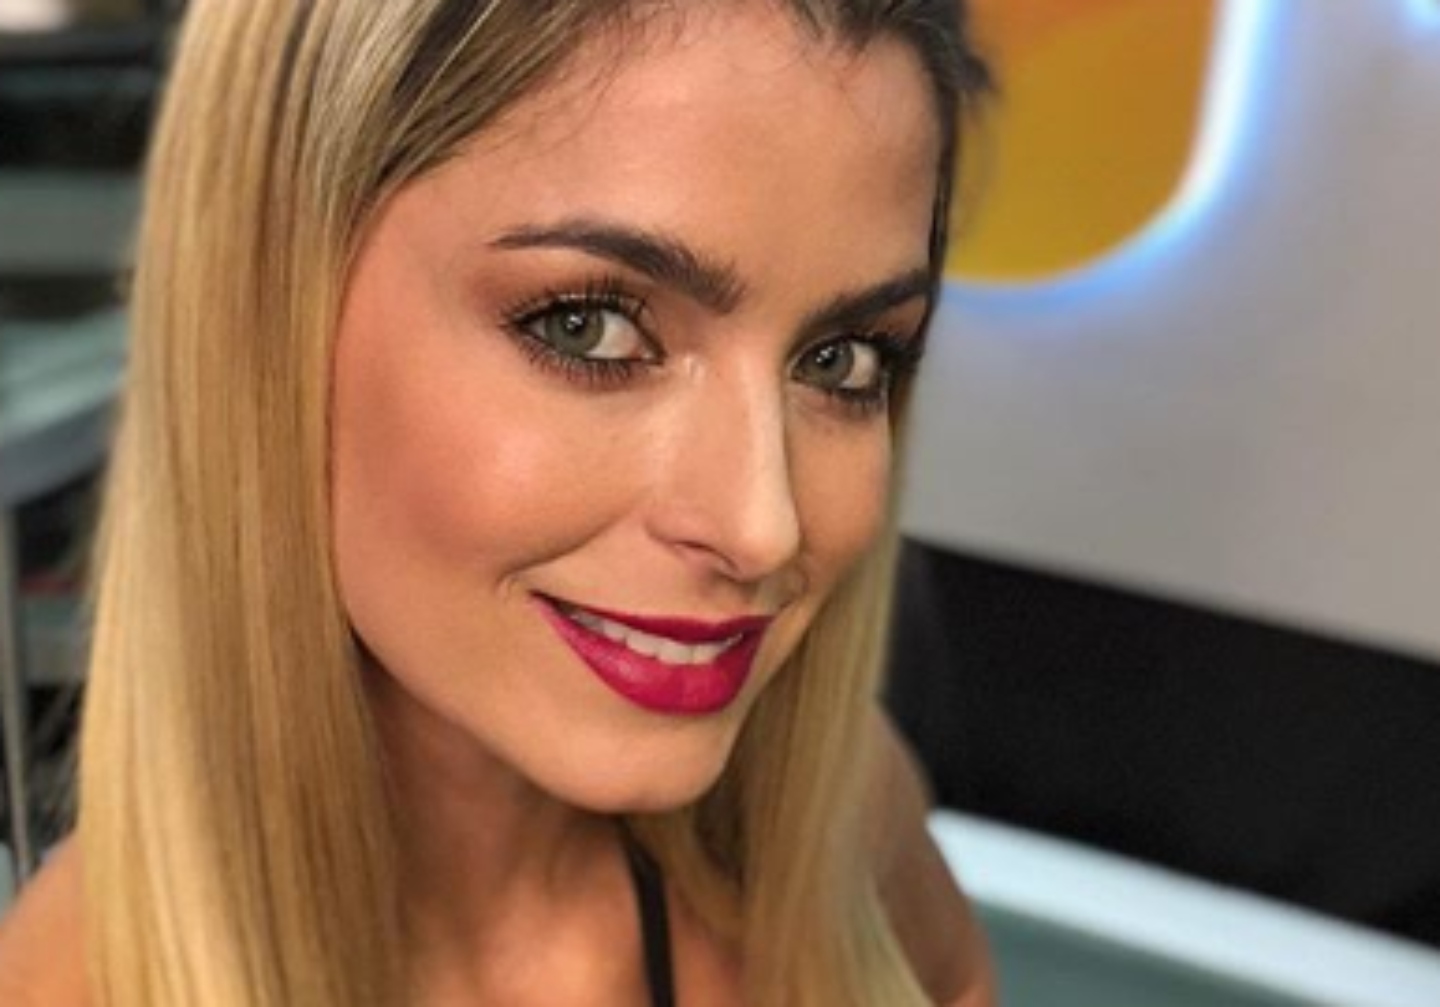 Cristina Hurtado showed how her body was after giving birth